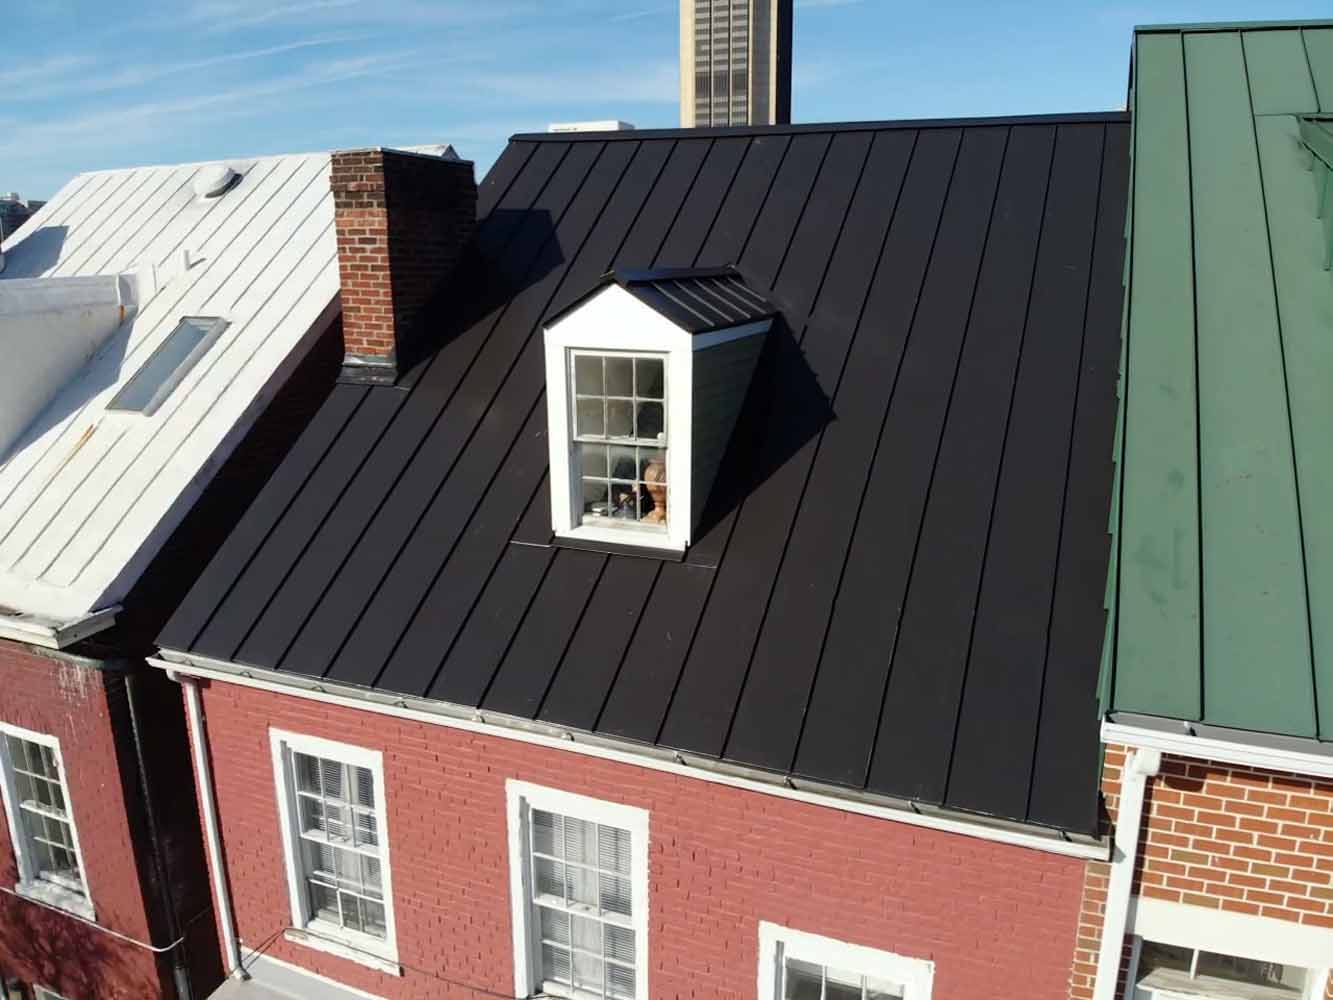 Different color options of metal roofing - shown here are silver, black, and green.